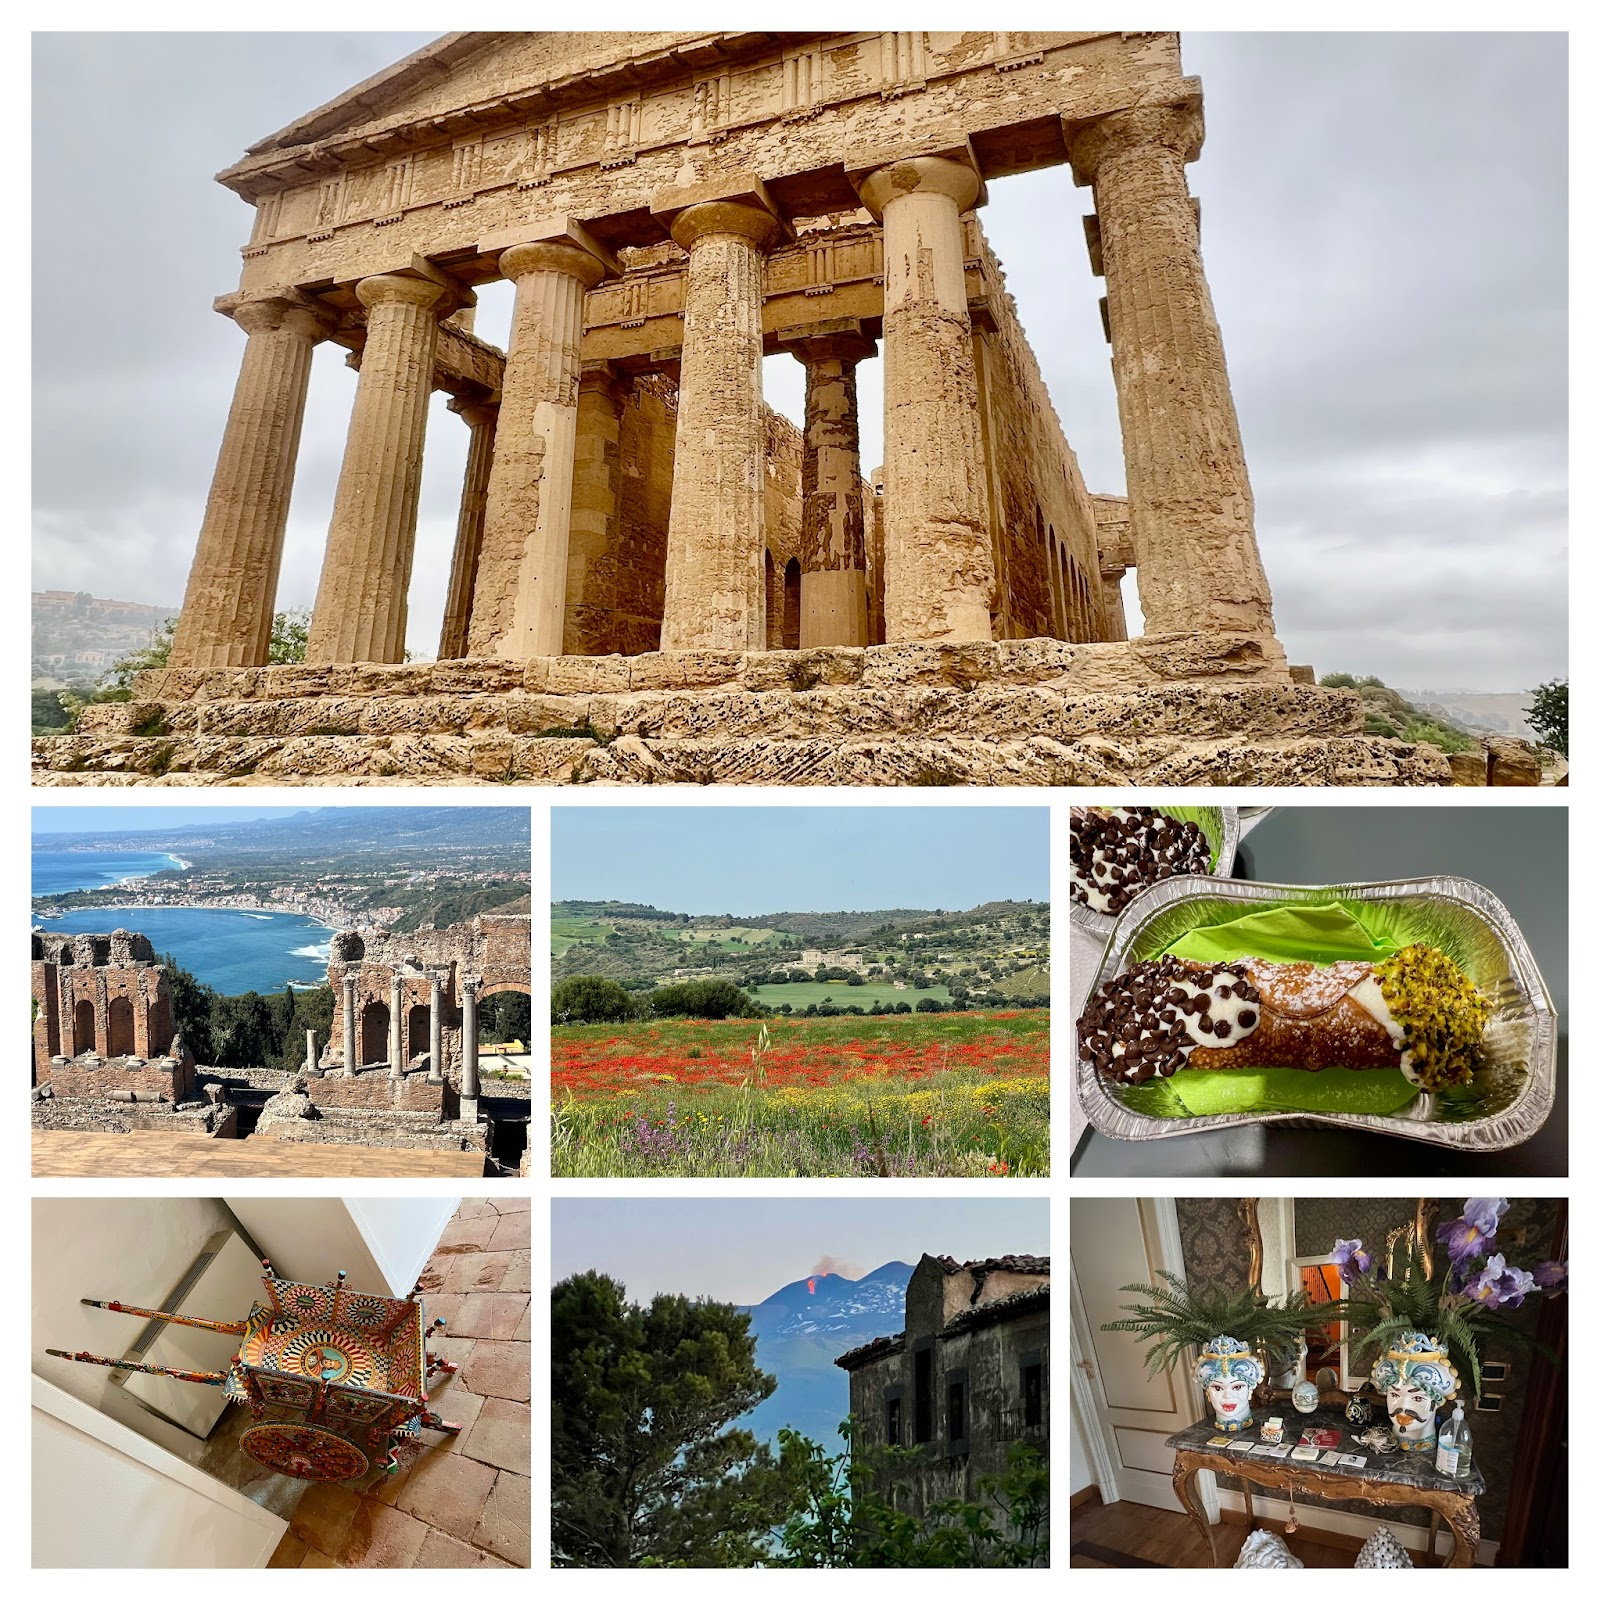 Trip Report Ultimate Month in Sicily - Fodor's Travel Talk Forums